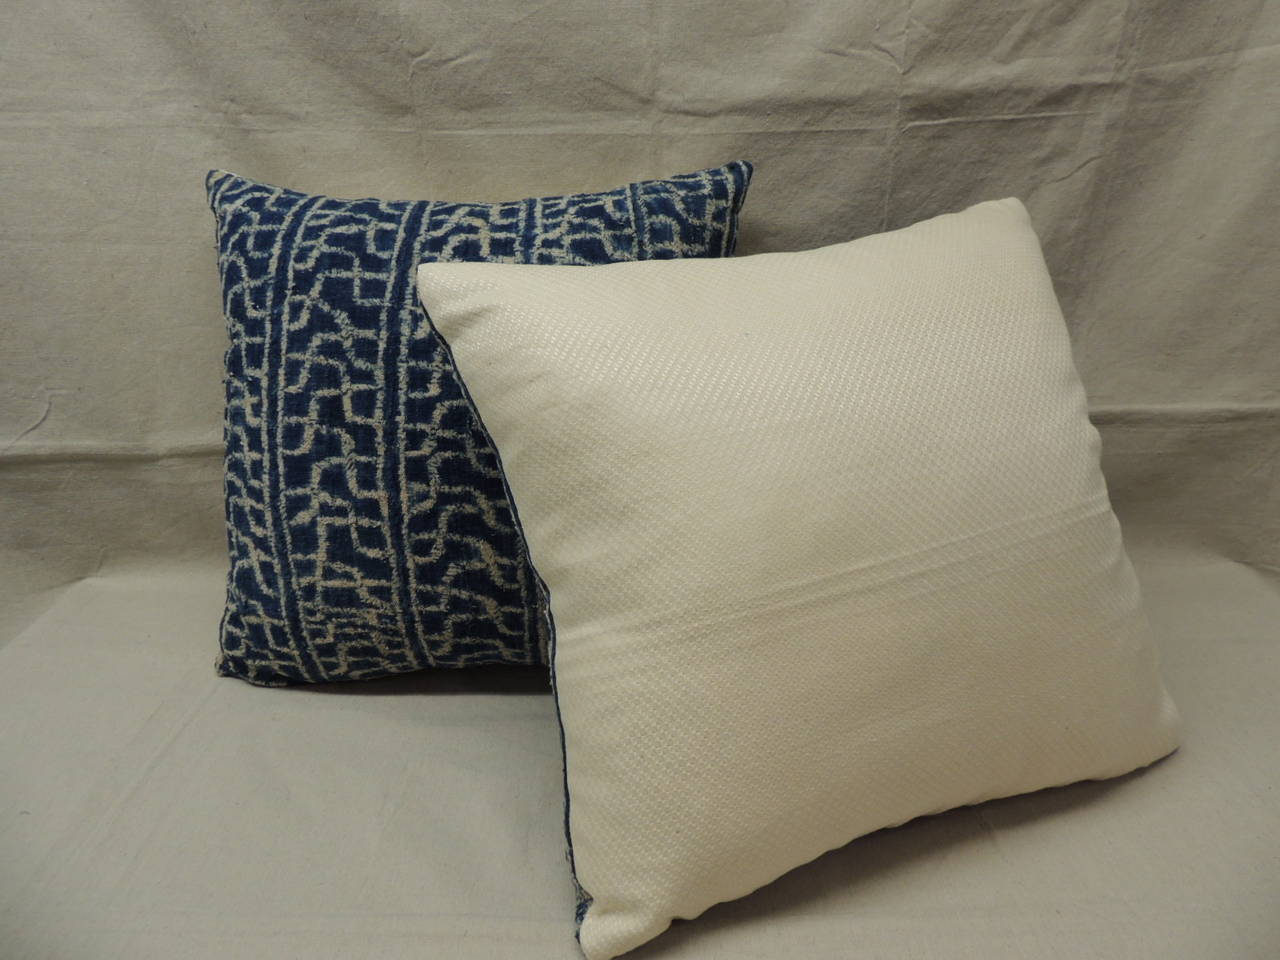 Hand-Crafted Pair of African Blue and Natural Pillows